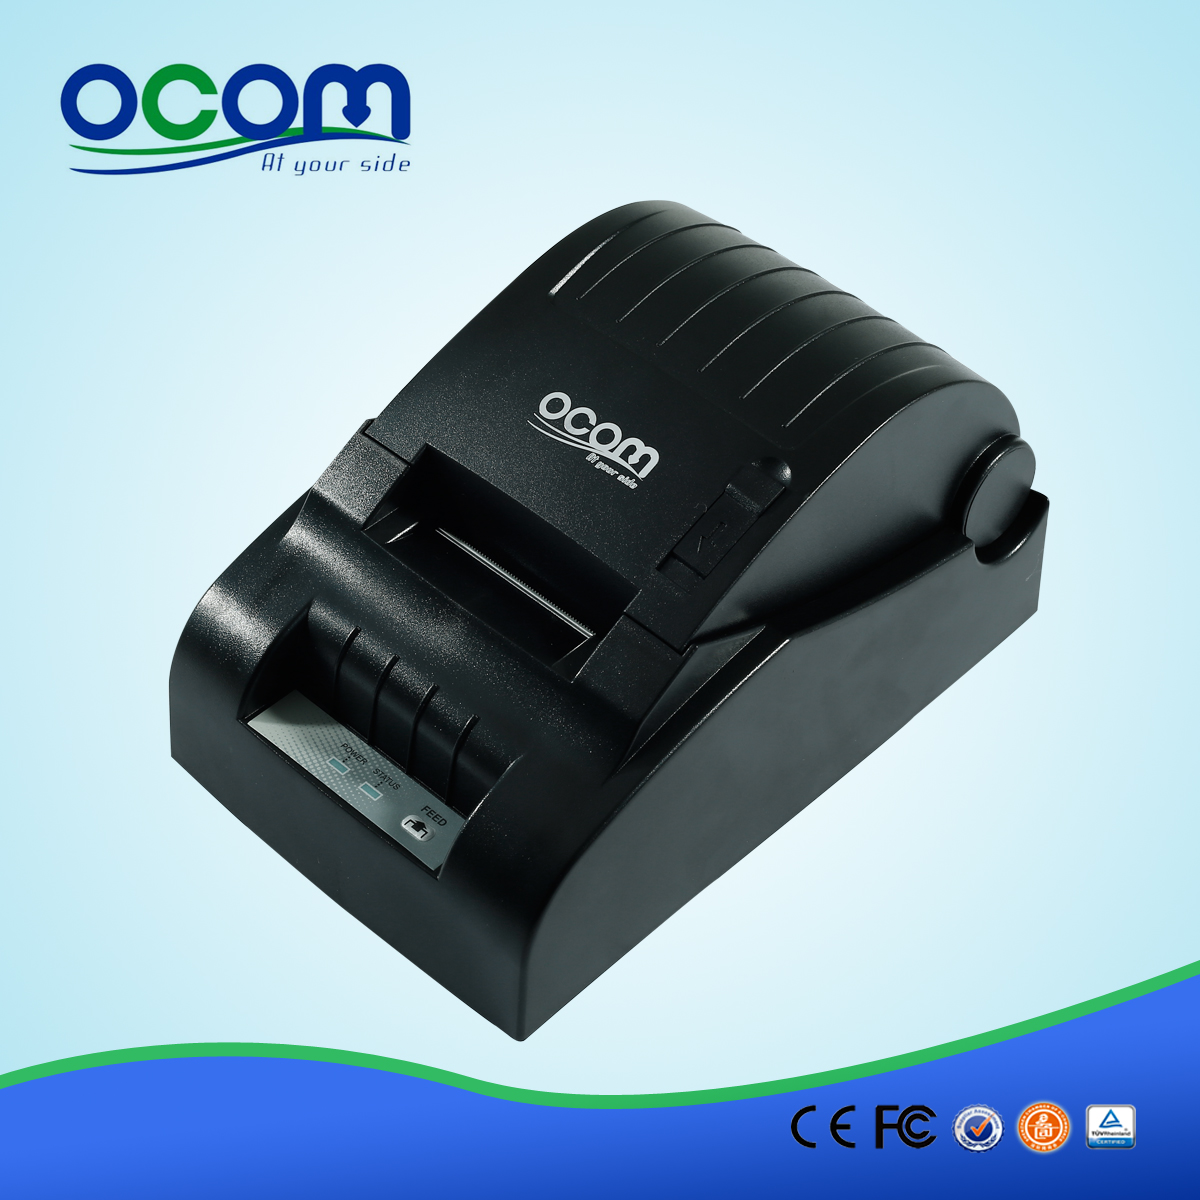 China made low cost 58mm POS receipt printer